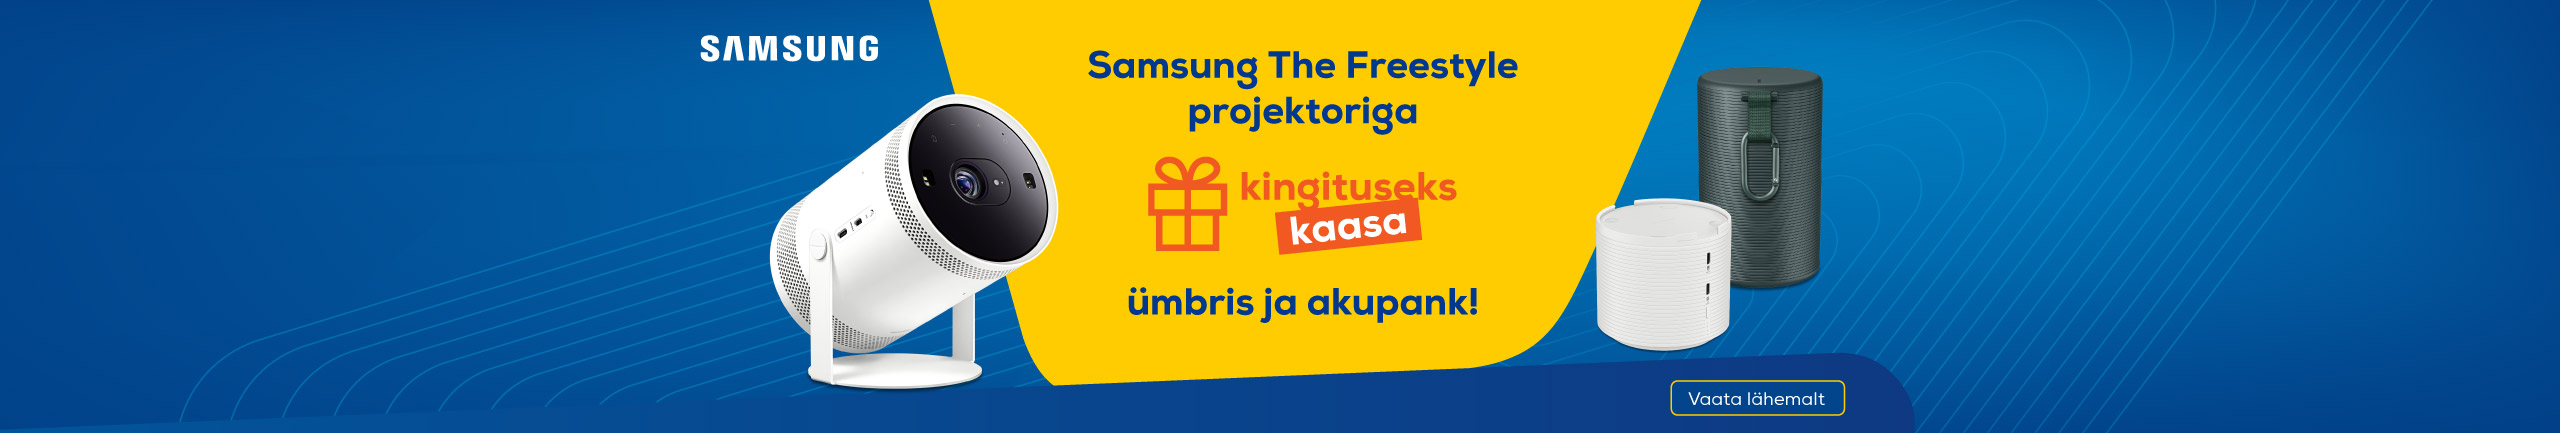 Get a complimentary batterypack and cover with every Samsung Freestyle purchase!